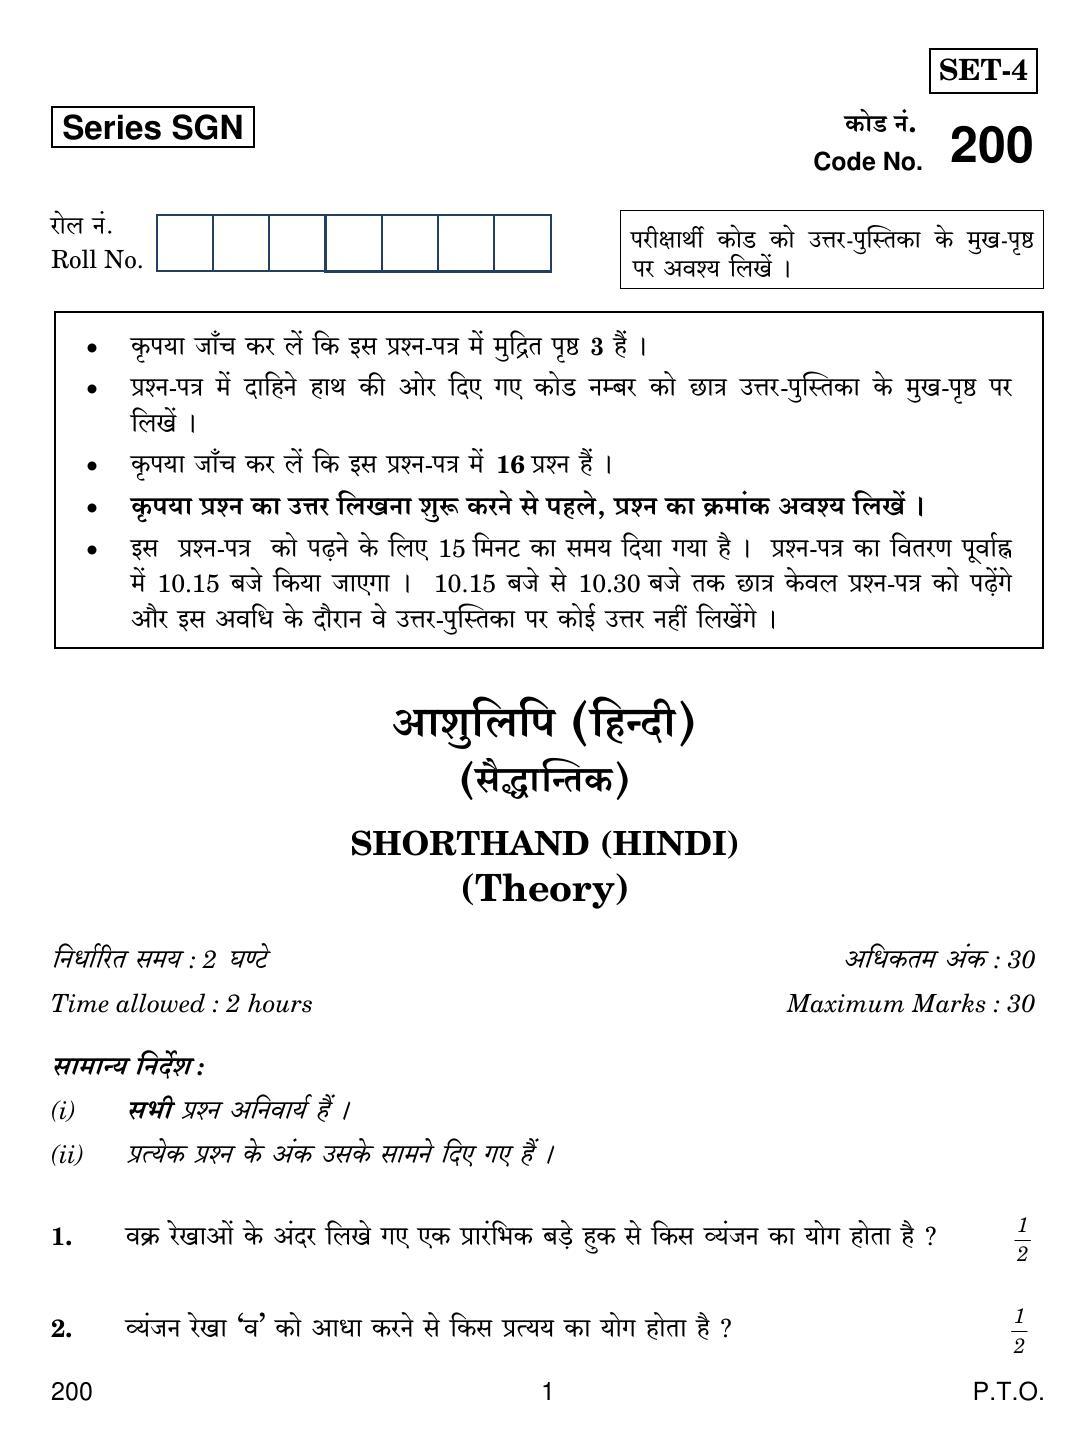 CBSE Class 12 200 SHORTHAND HINDI 2018 Question Paper - Page 1